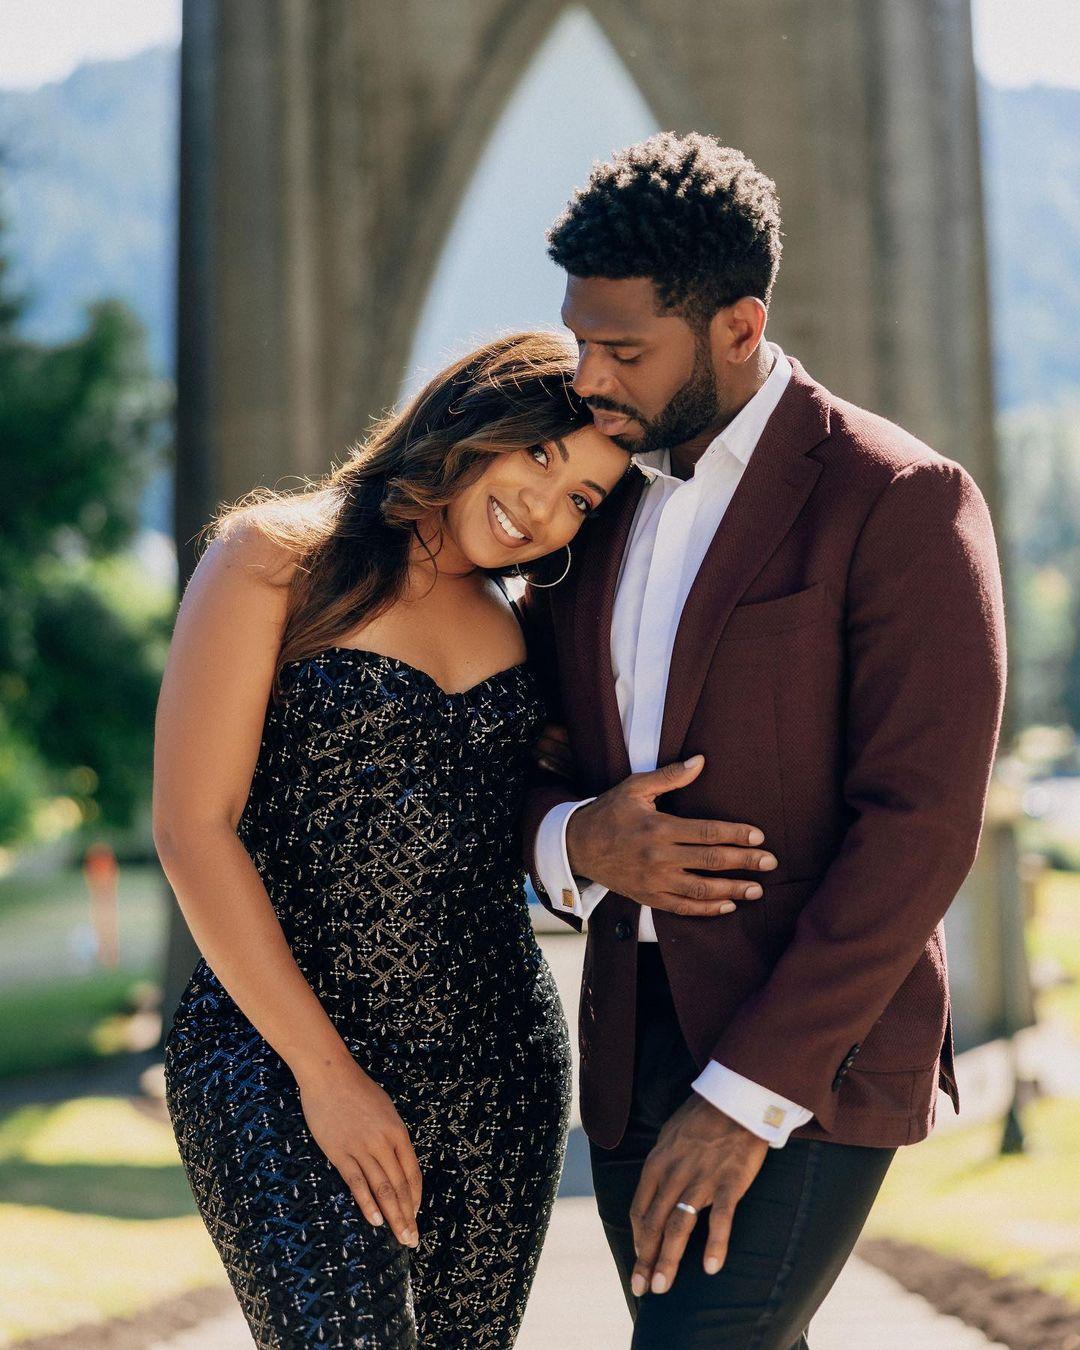 Brett and Tiffany Brown from "Love Is Blind" share their latest photos